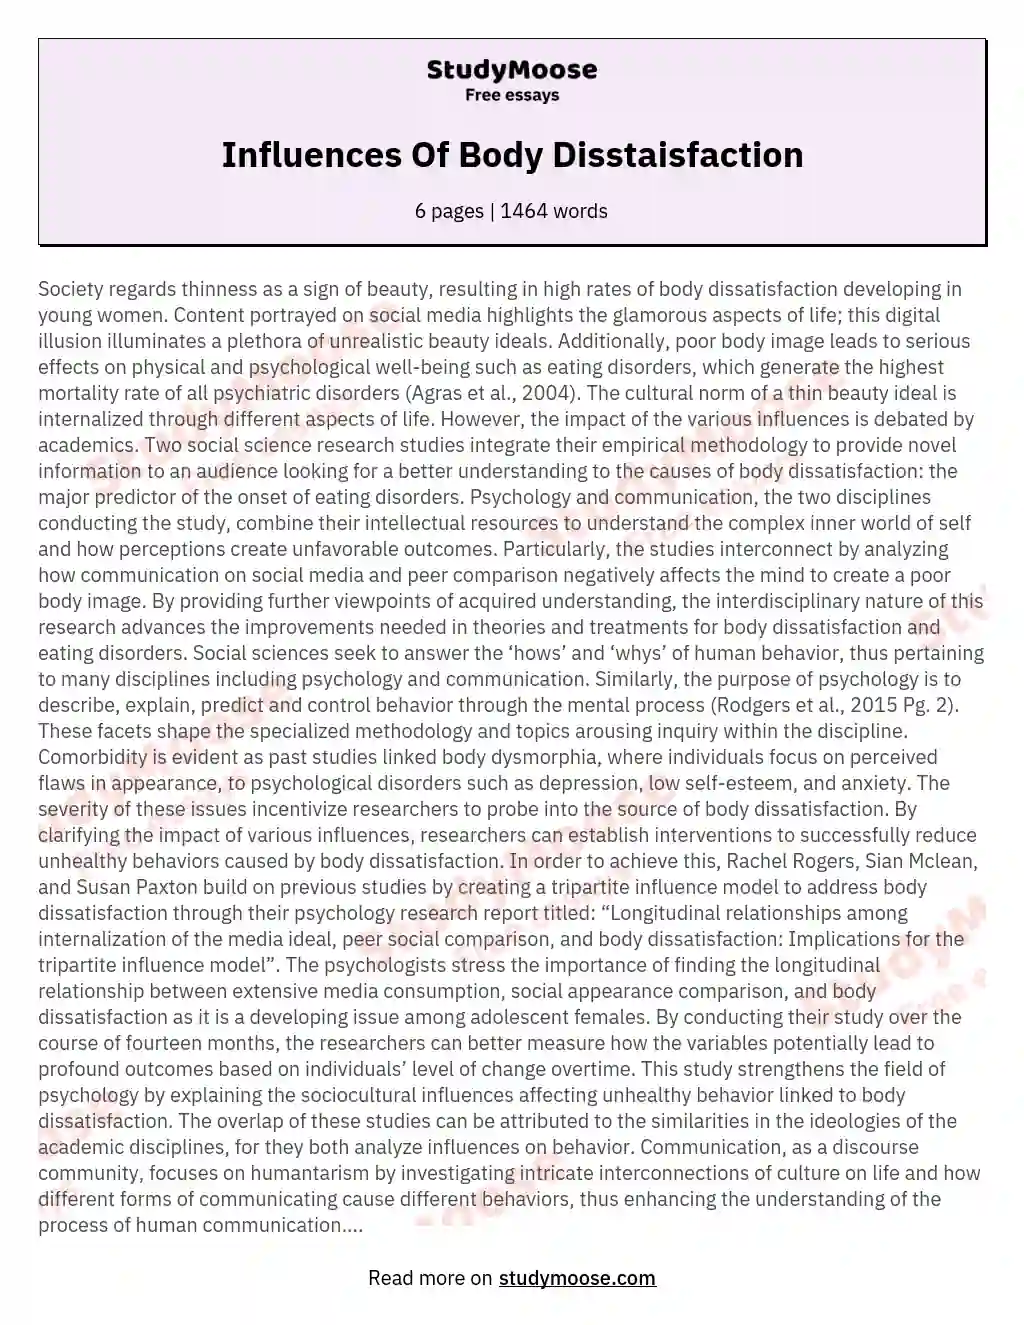 Influences Of Body Disstaisfaction essay